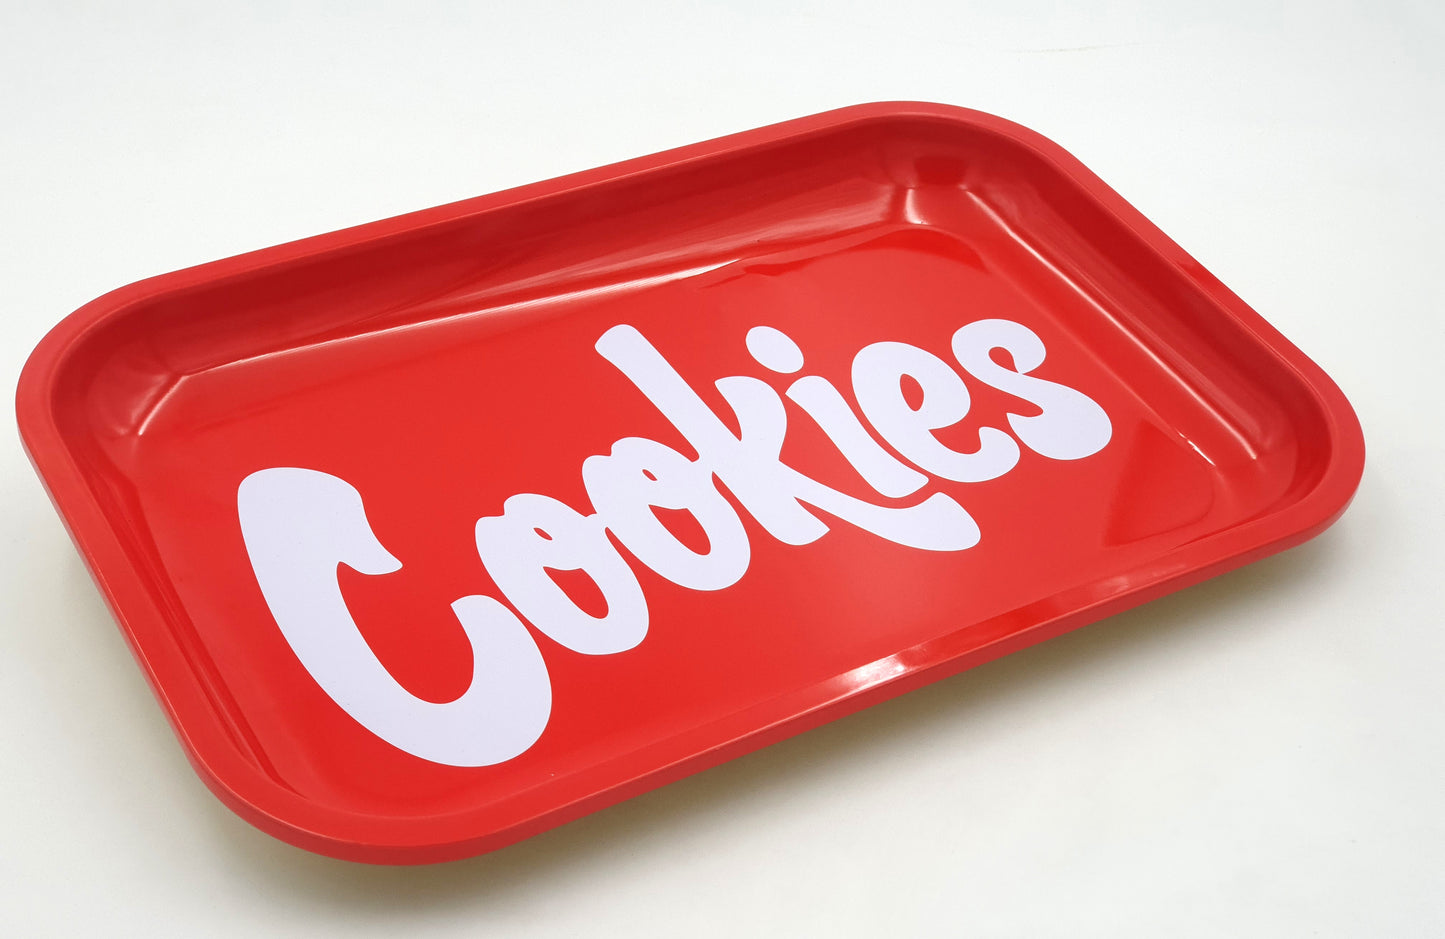 Cookies Rolling Tray - Large